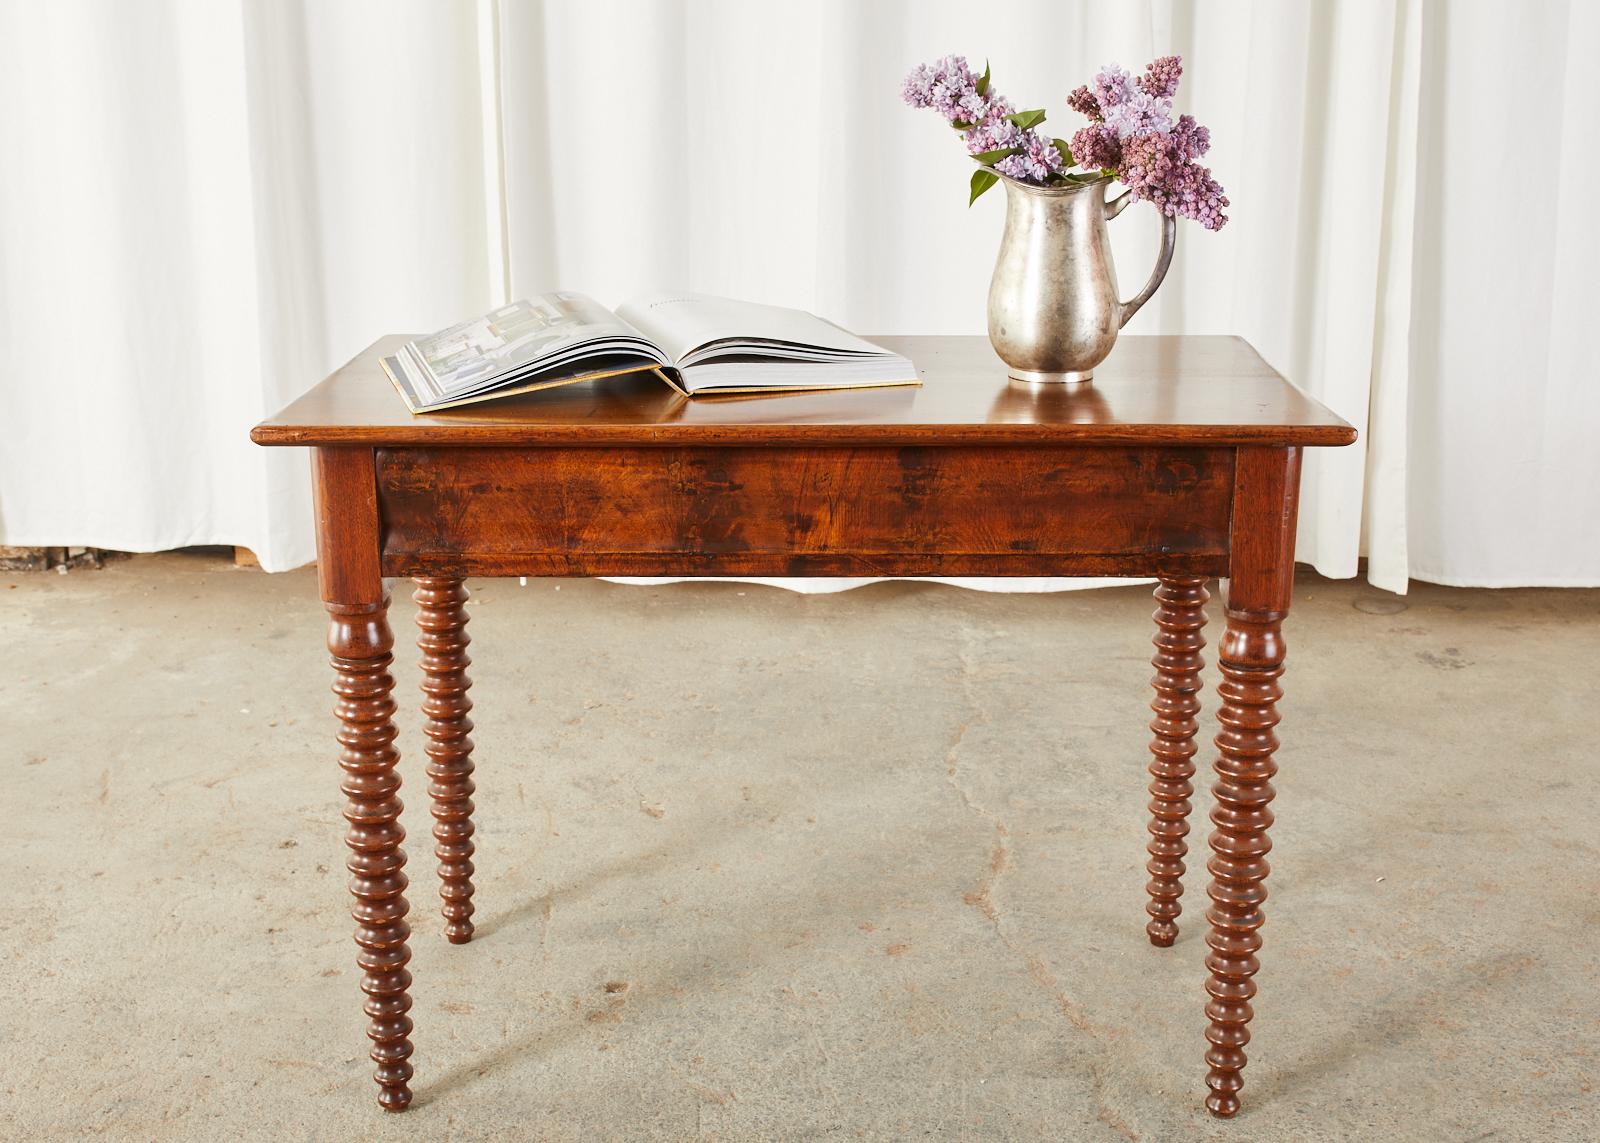 Handsome 19th century English console table, work table, or writing table made in the George IV taste. Constructed from radiant grained mahogany featuring elegant, tapered bobbin-turned legs. The case has a mahogany veneered front frieze with a